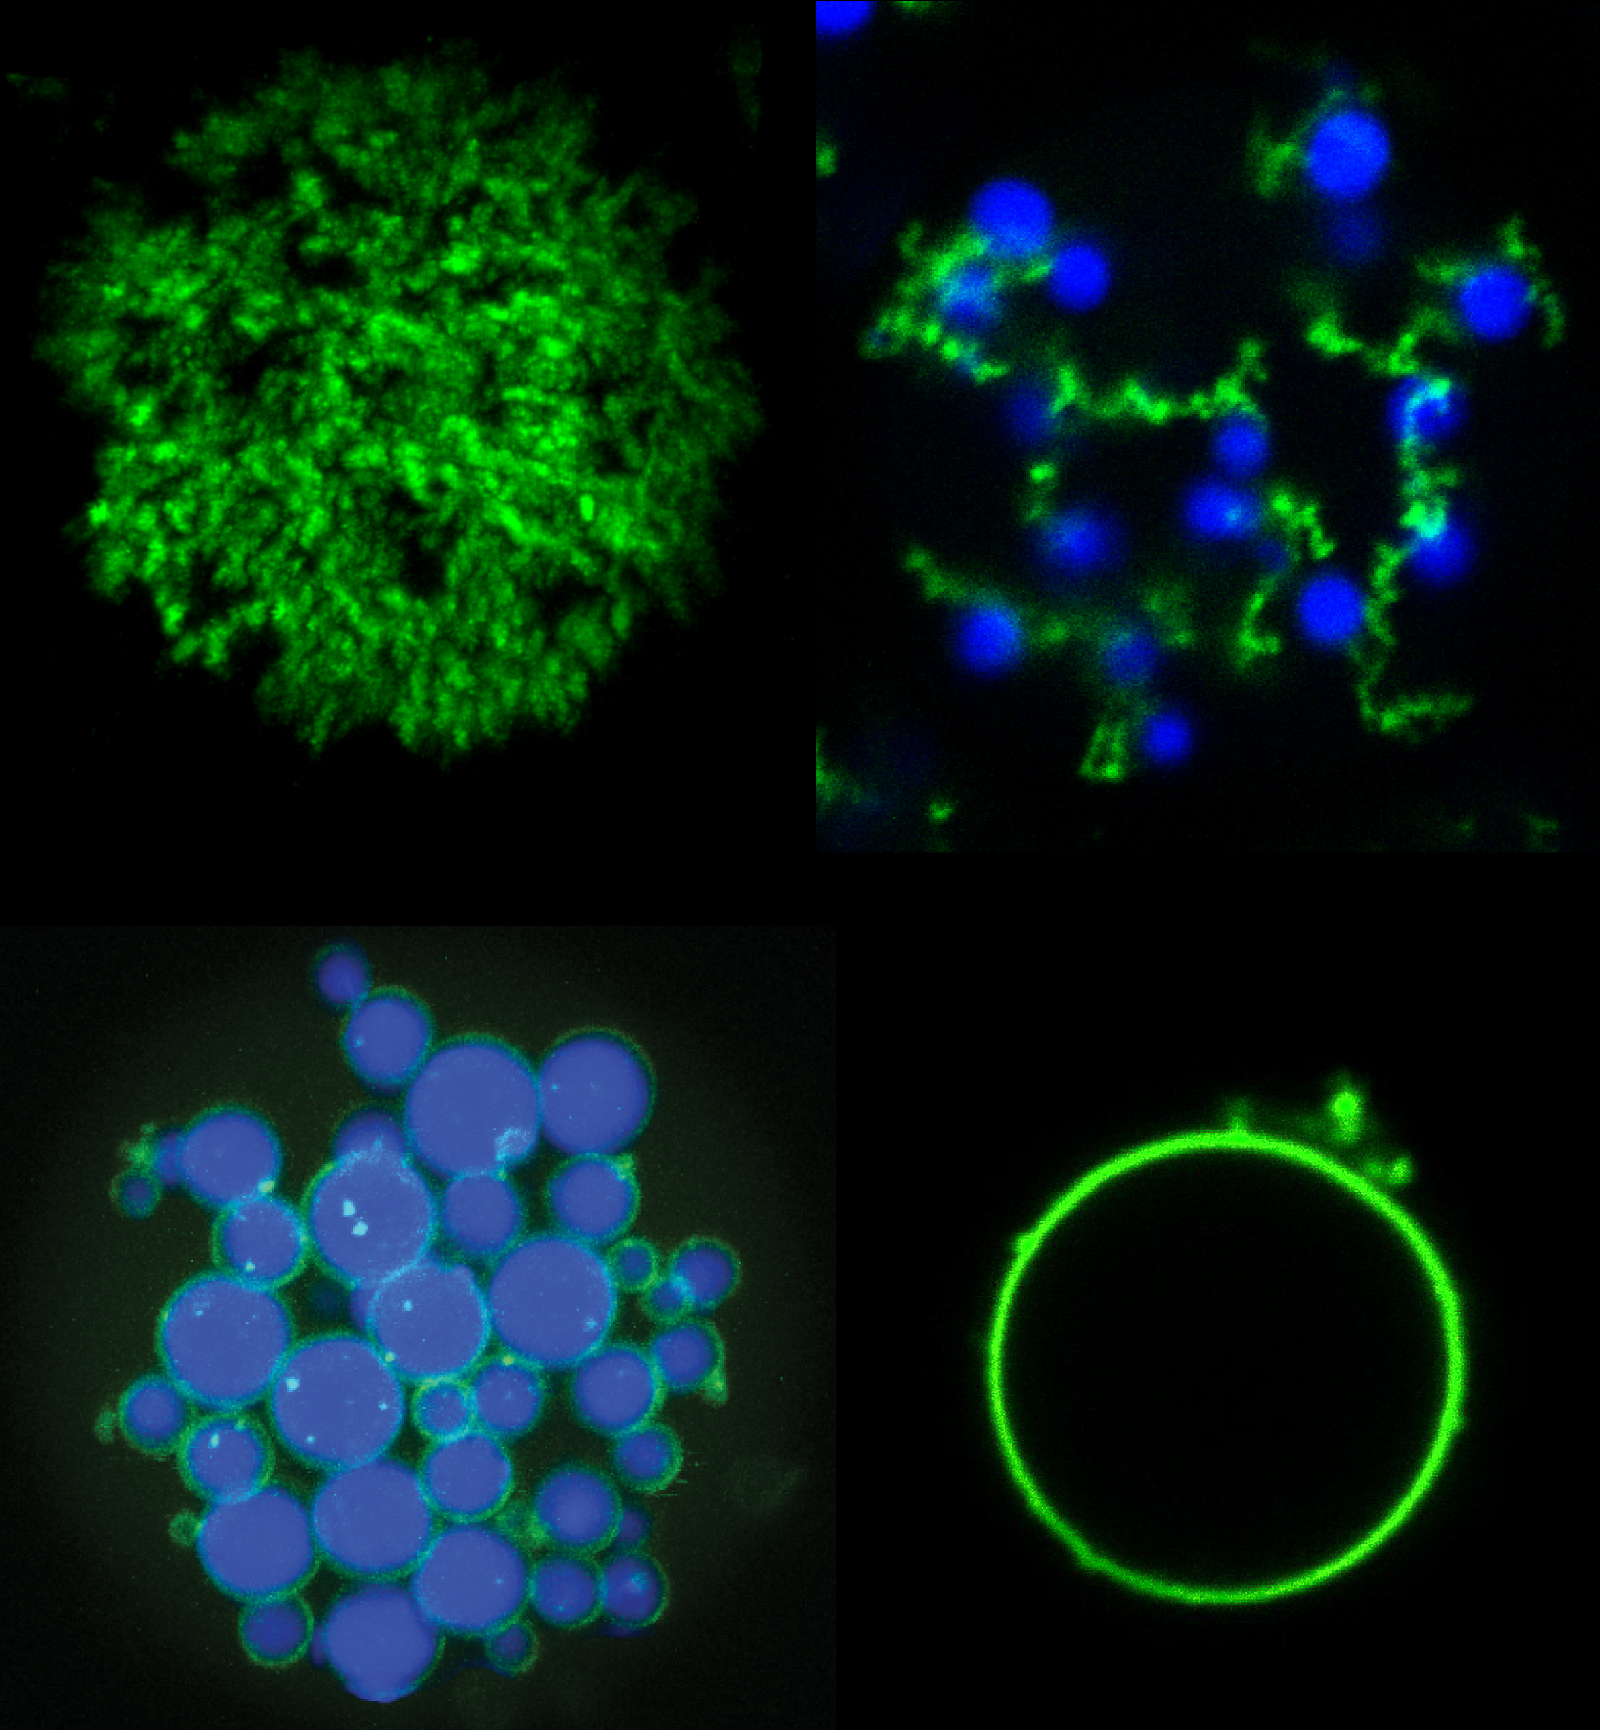 four fluorescent images of different microparticle shapes on a black background